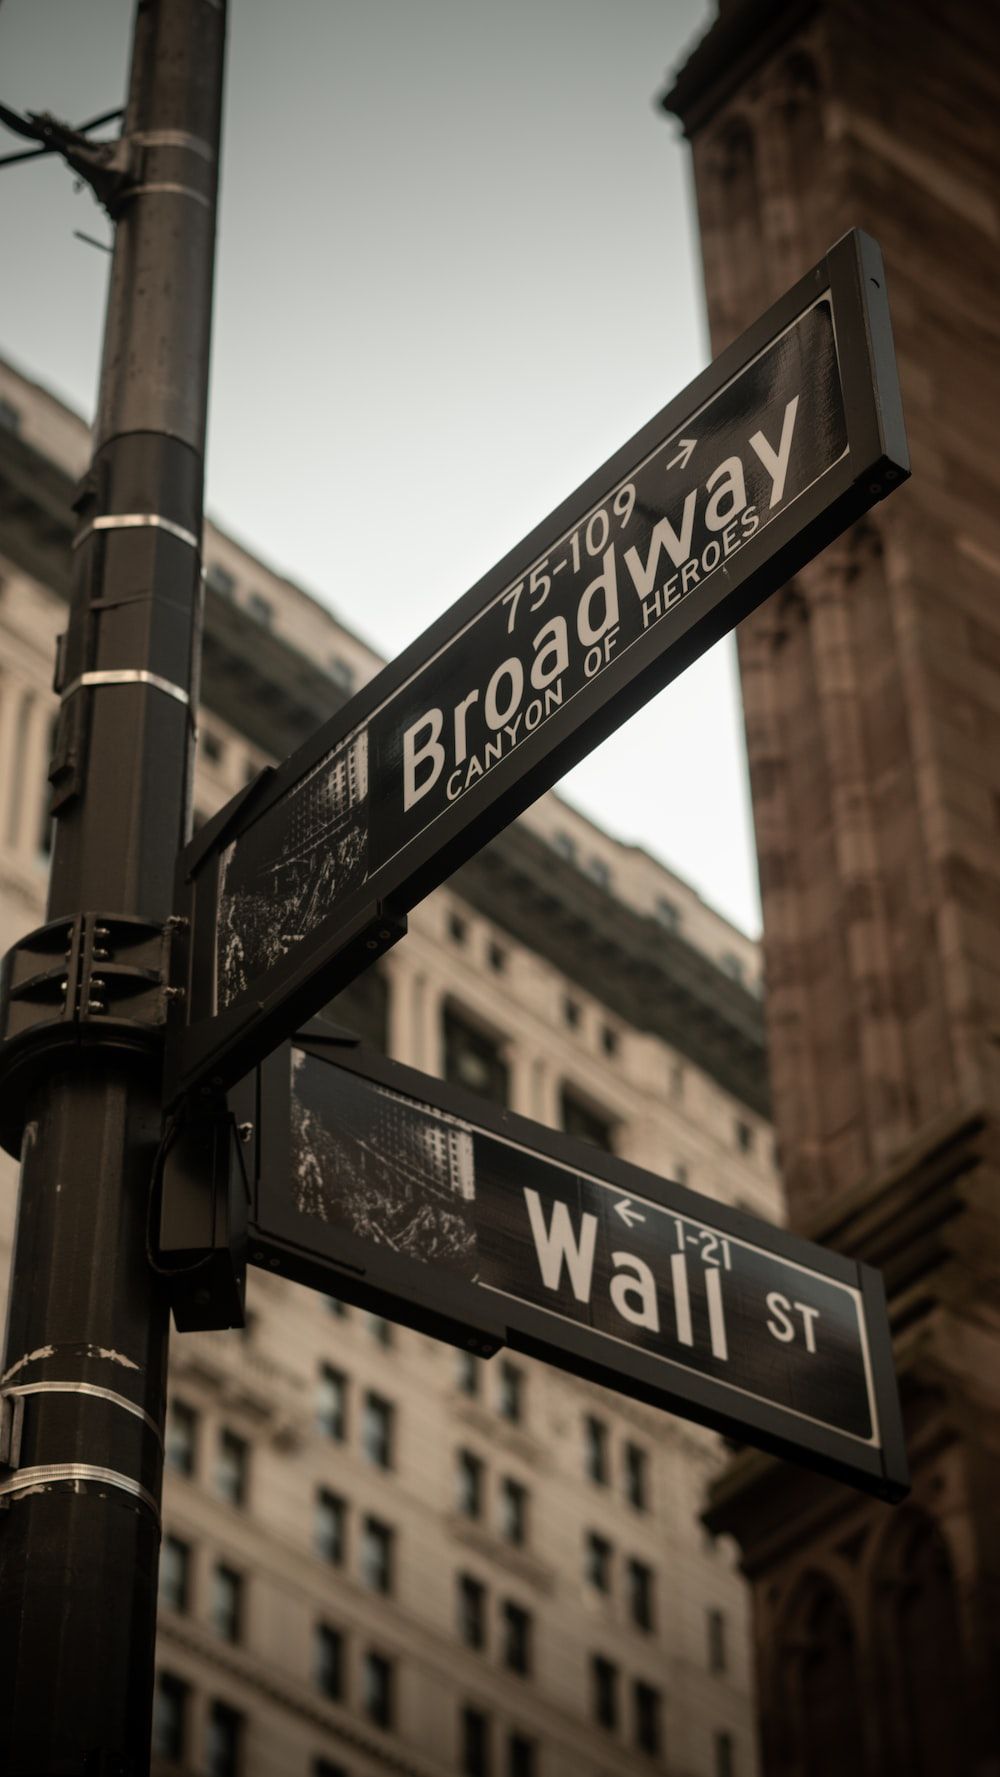 A street sign for Broadway and Wall Street in New York City. - Broadway